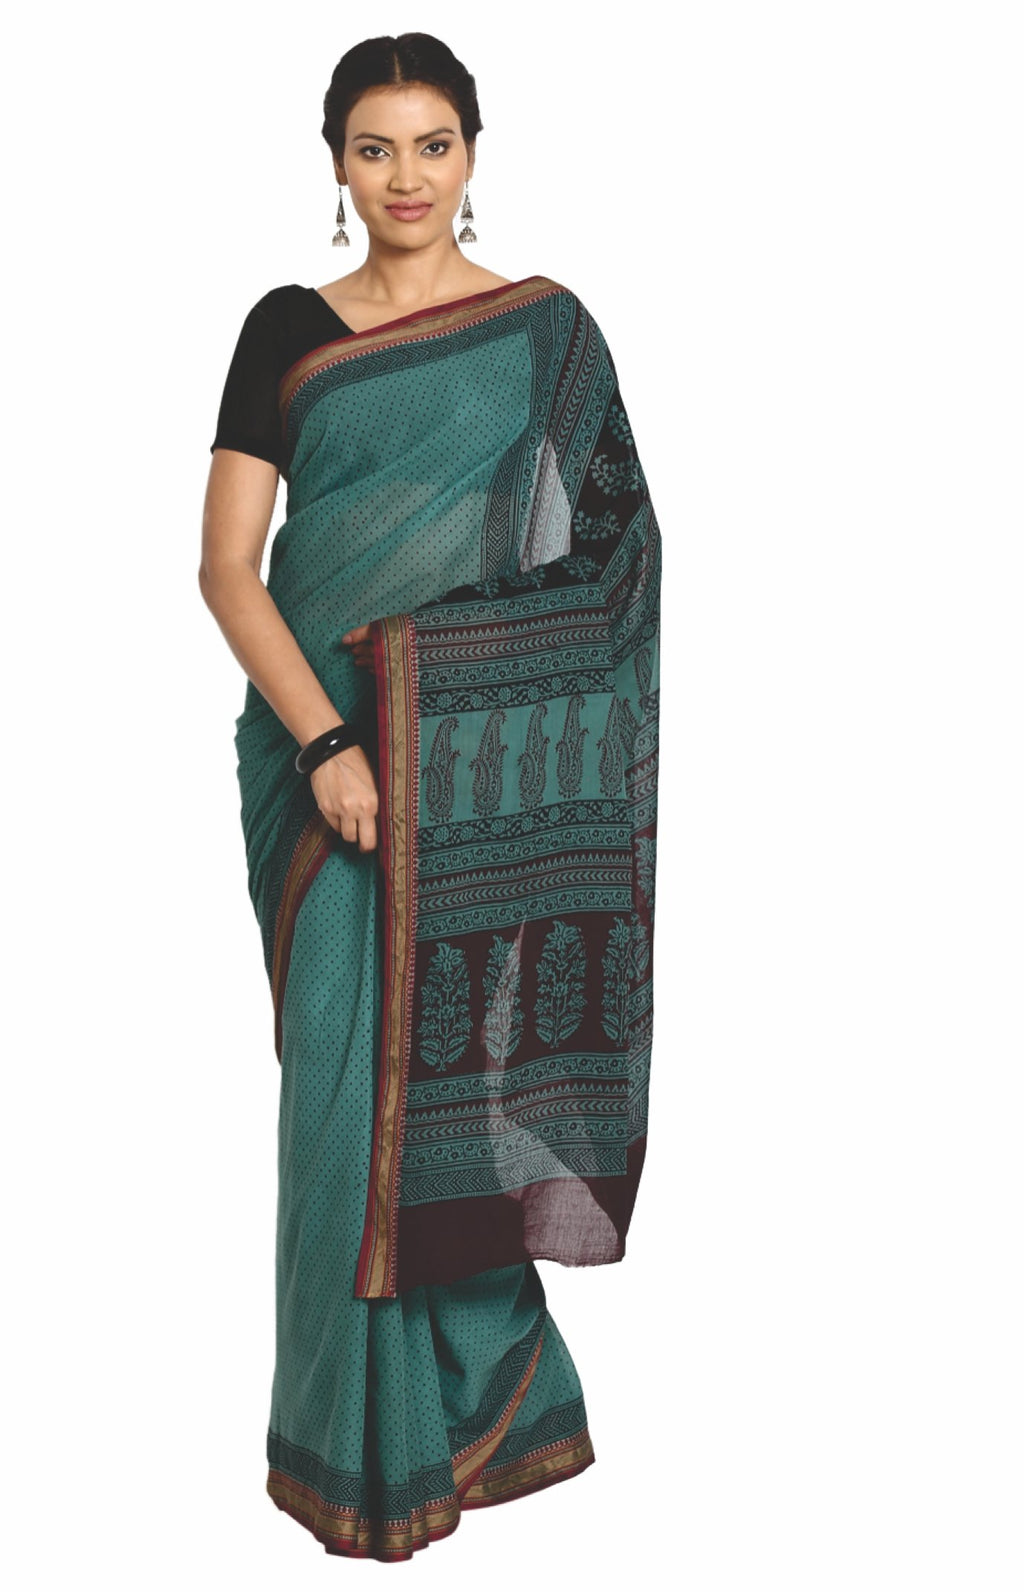 Teal Green Cotton Hand Block Bagh Print Handcrafted Saree-Saree-Kalakari India-ZIBASA0080-Bagh, Cotton, Geographical Indication, Hand Blocks, Hand Crafted, Heritage Prints, Natural Dyes, Sarees, Sustainable Fabrics-[Linen,Ethnic,wear,Fashionista,Handloom,Handicraft,Indigo,blockprint,block,print,Cotton,Chanderi,Blue, latest,classy,party,bollywood,trendy,summer,style,traditional,formal,elegant,unique,style,hand,block,print, dabu,booti,gift,present,glamorous,affordable,collectible,Sari,Saree,printe